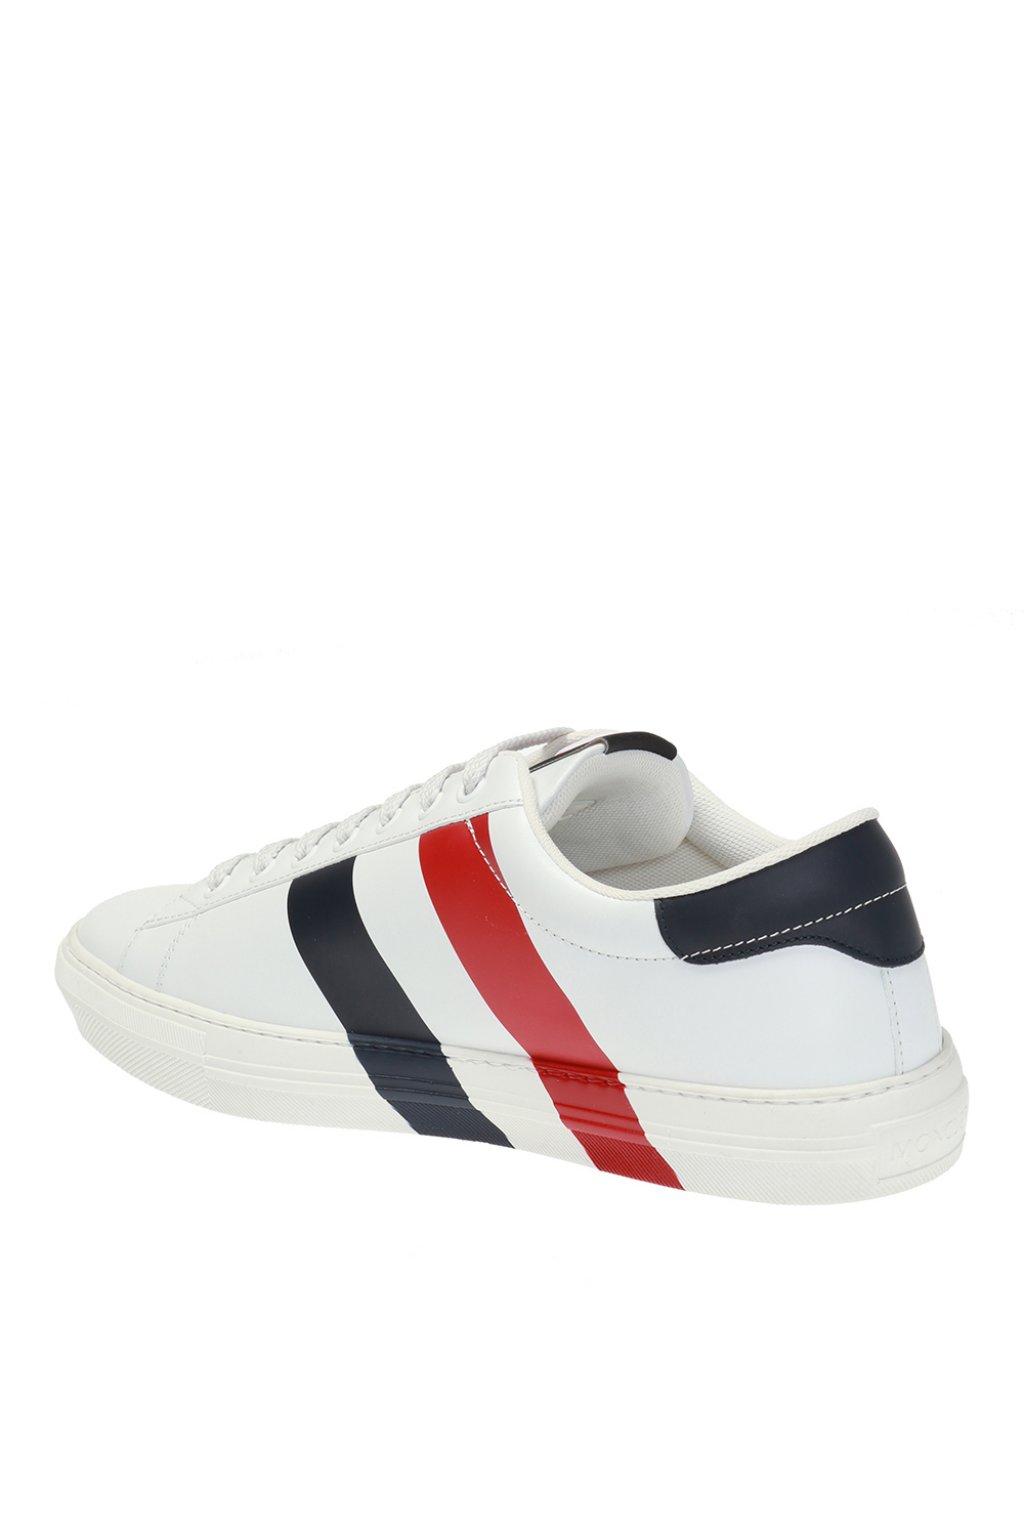 Moncler Leather Striped Low Top Sneakers for Men - Save 53% - Lyst